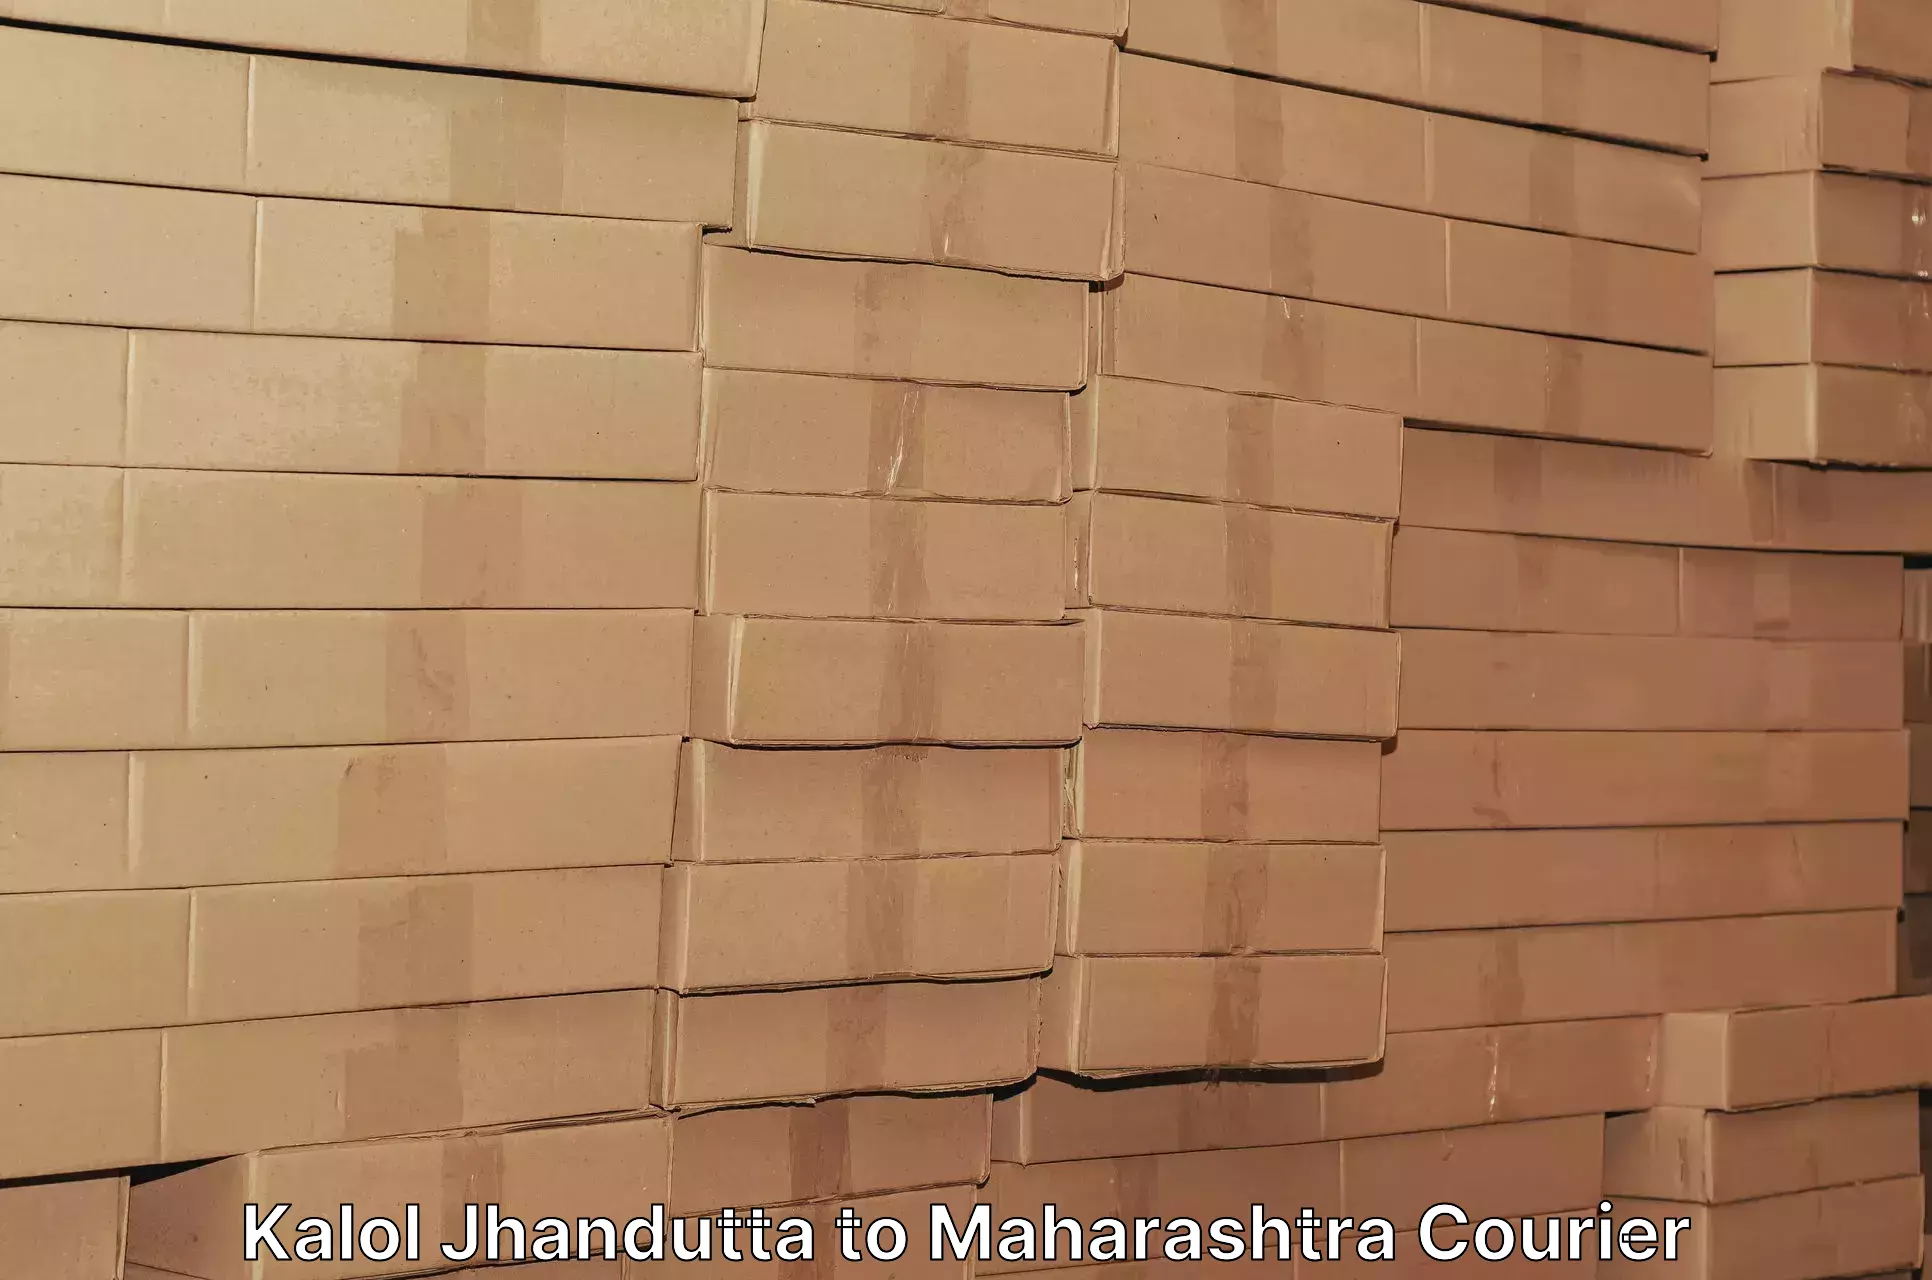 Subscription-based courier Kalol Jhandutta to Jamkhed